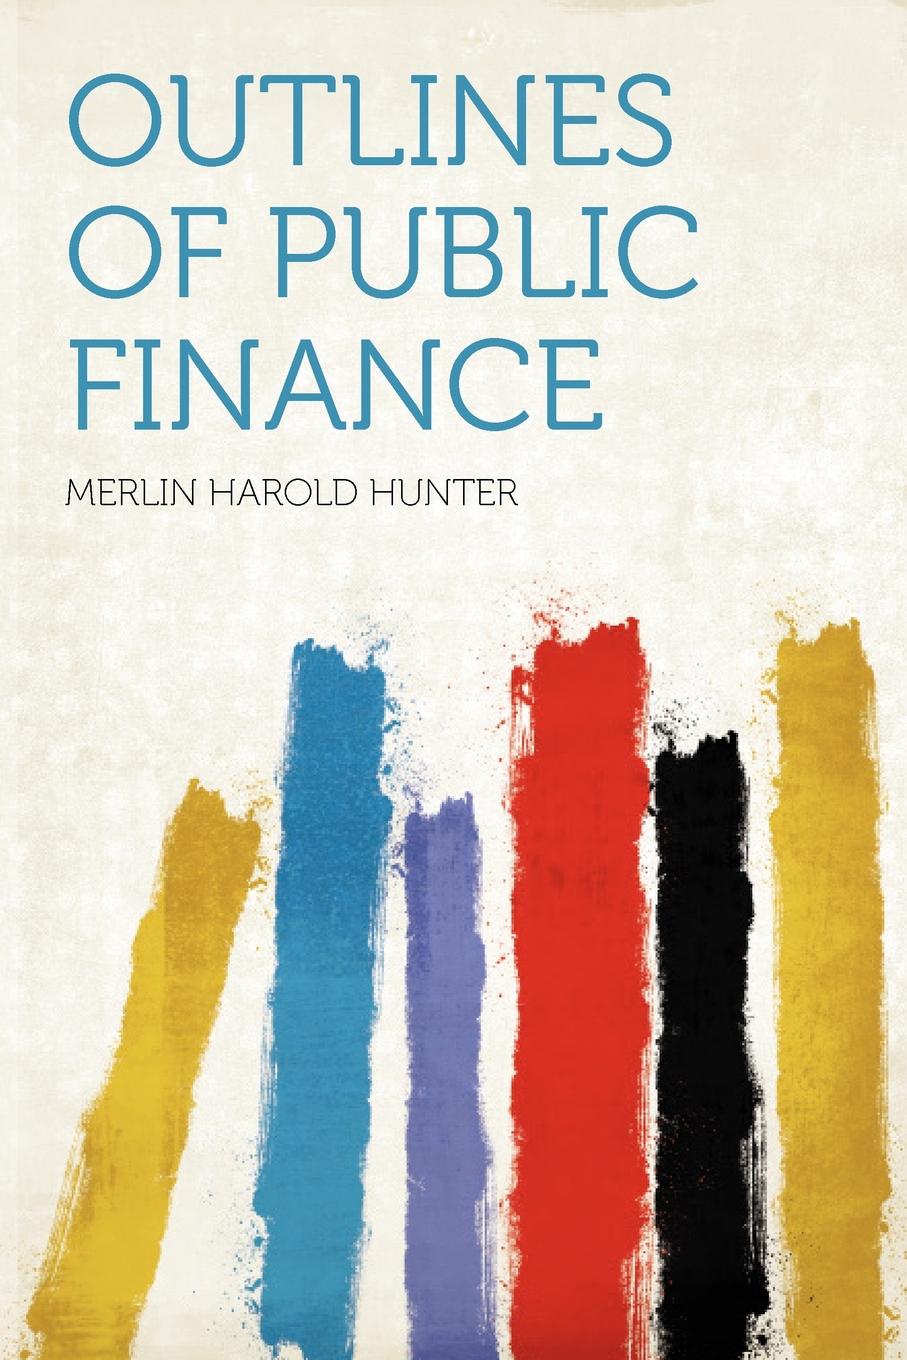 Outlines of Public Finance